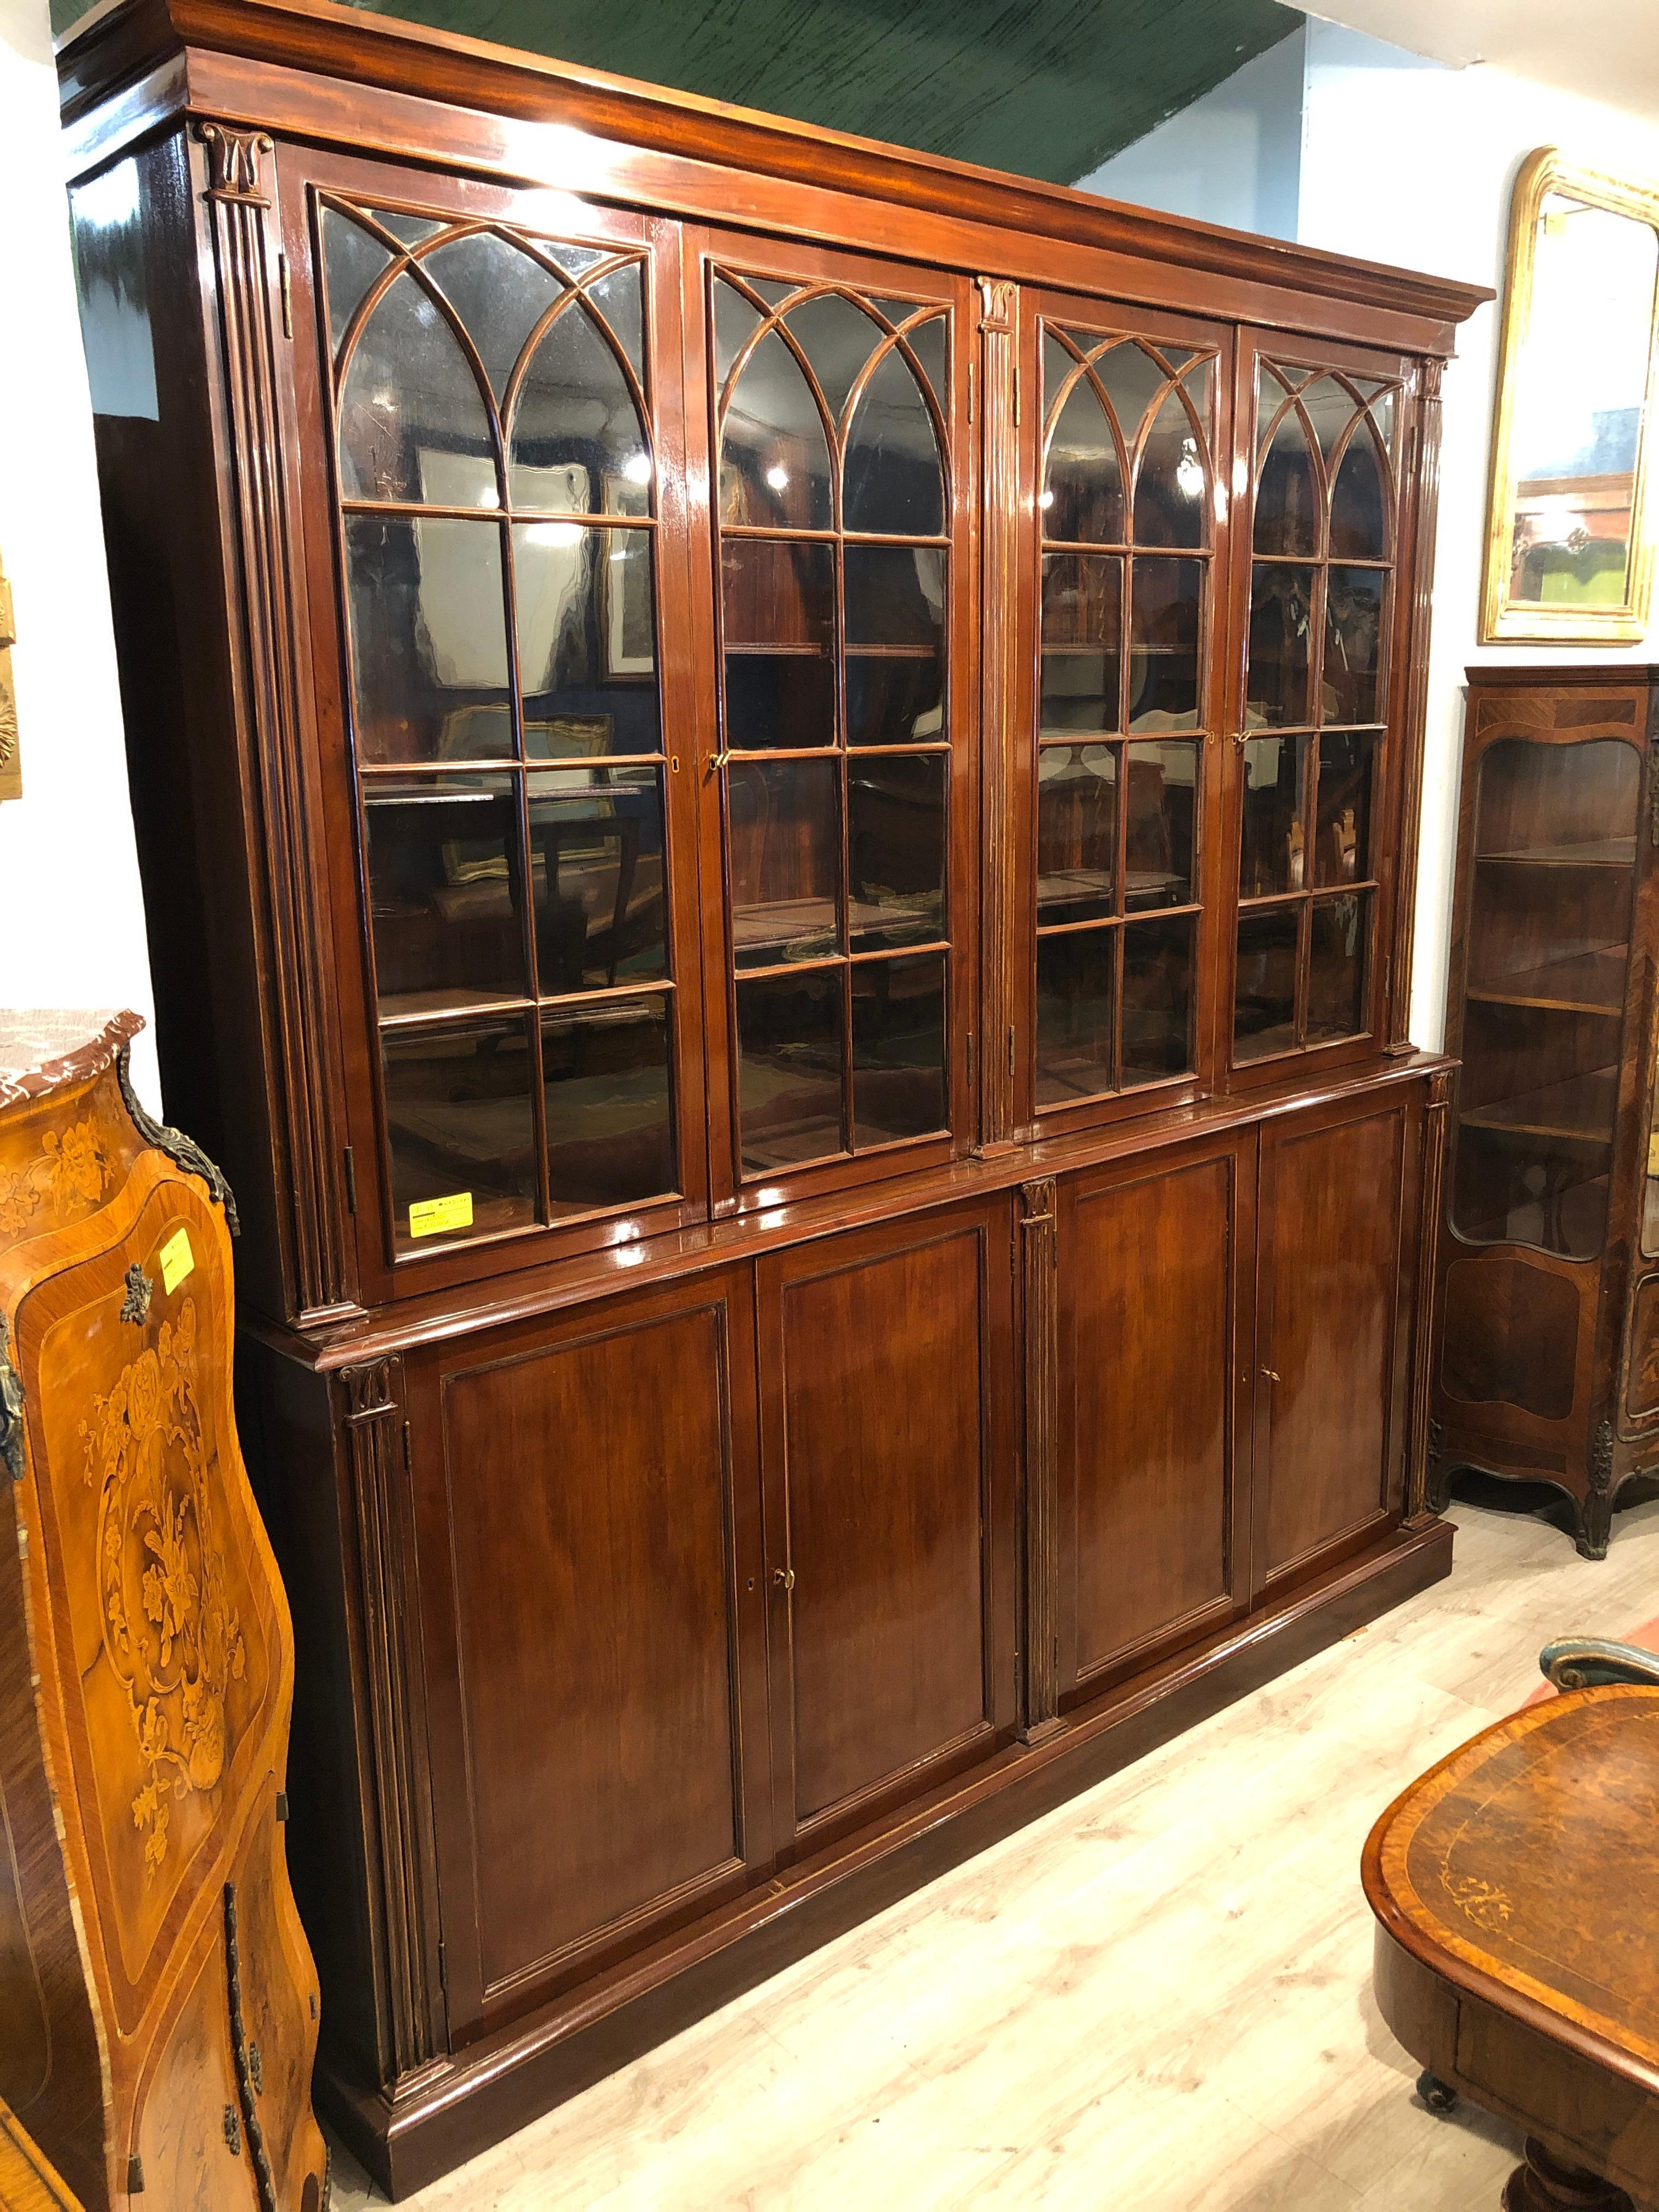 English four-door bookcase in mahogany, Regency period, circa 1820. Cabinet with four doors, above glass, under closed with wooden panel. In good condition, some small defections on glass and wood.
Carvings of excellent workmanship.